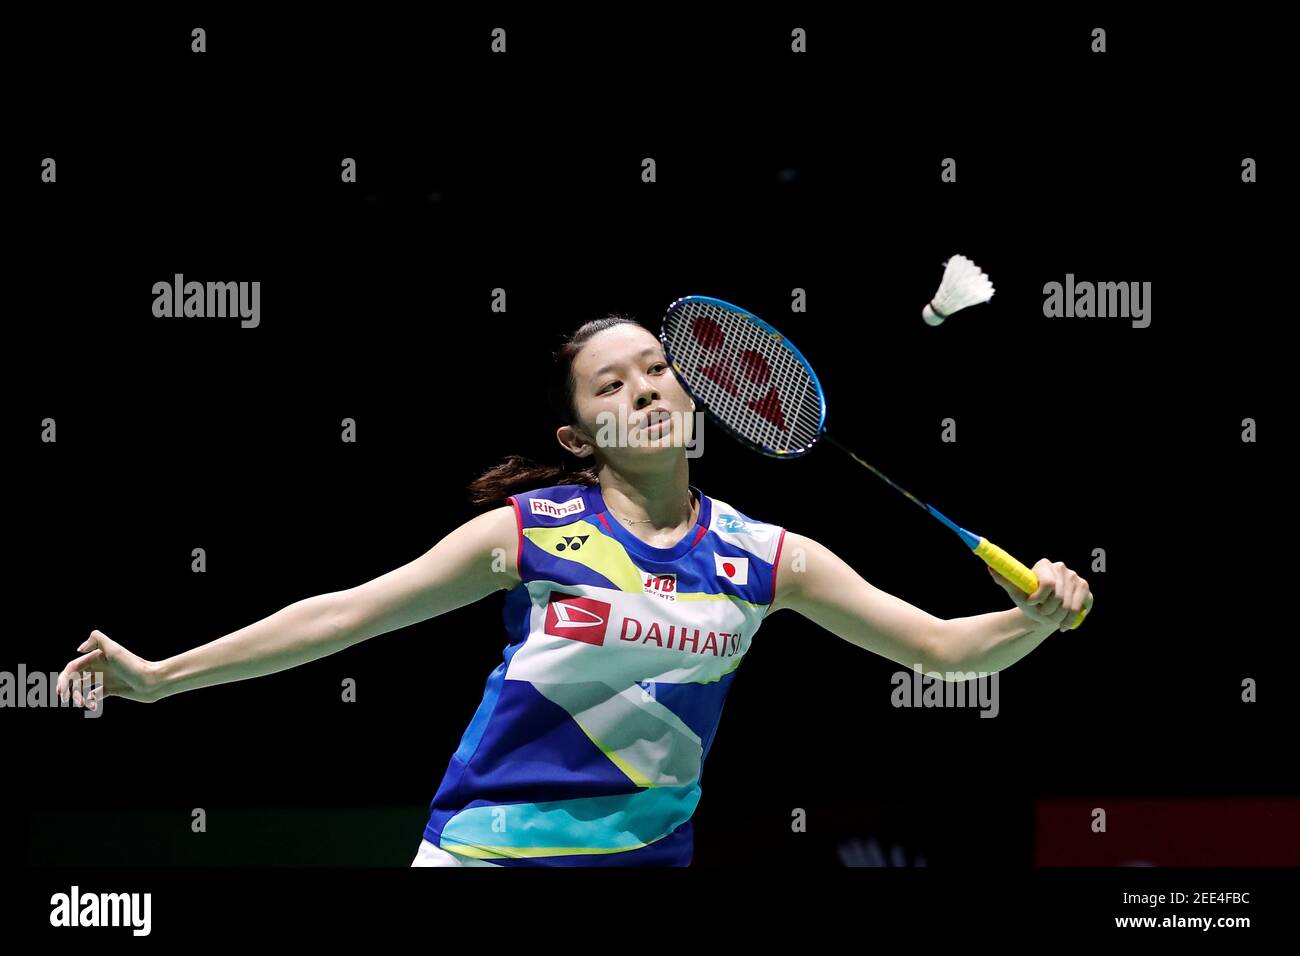 2019 Badminton World Championships - St. Jakobshalle Basel, Basel,  Switzerland - August 19, 2019 Japan's Sayaka Takahashi in action during her  women's singles first round match against Scotland's Kirsty Gilmour  REUTERS/Arnd Wiegmann Stock Photo - Alamy